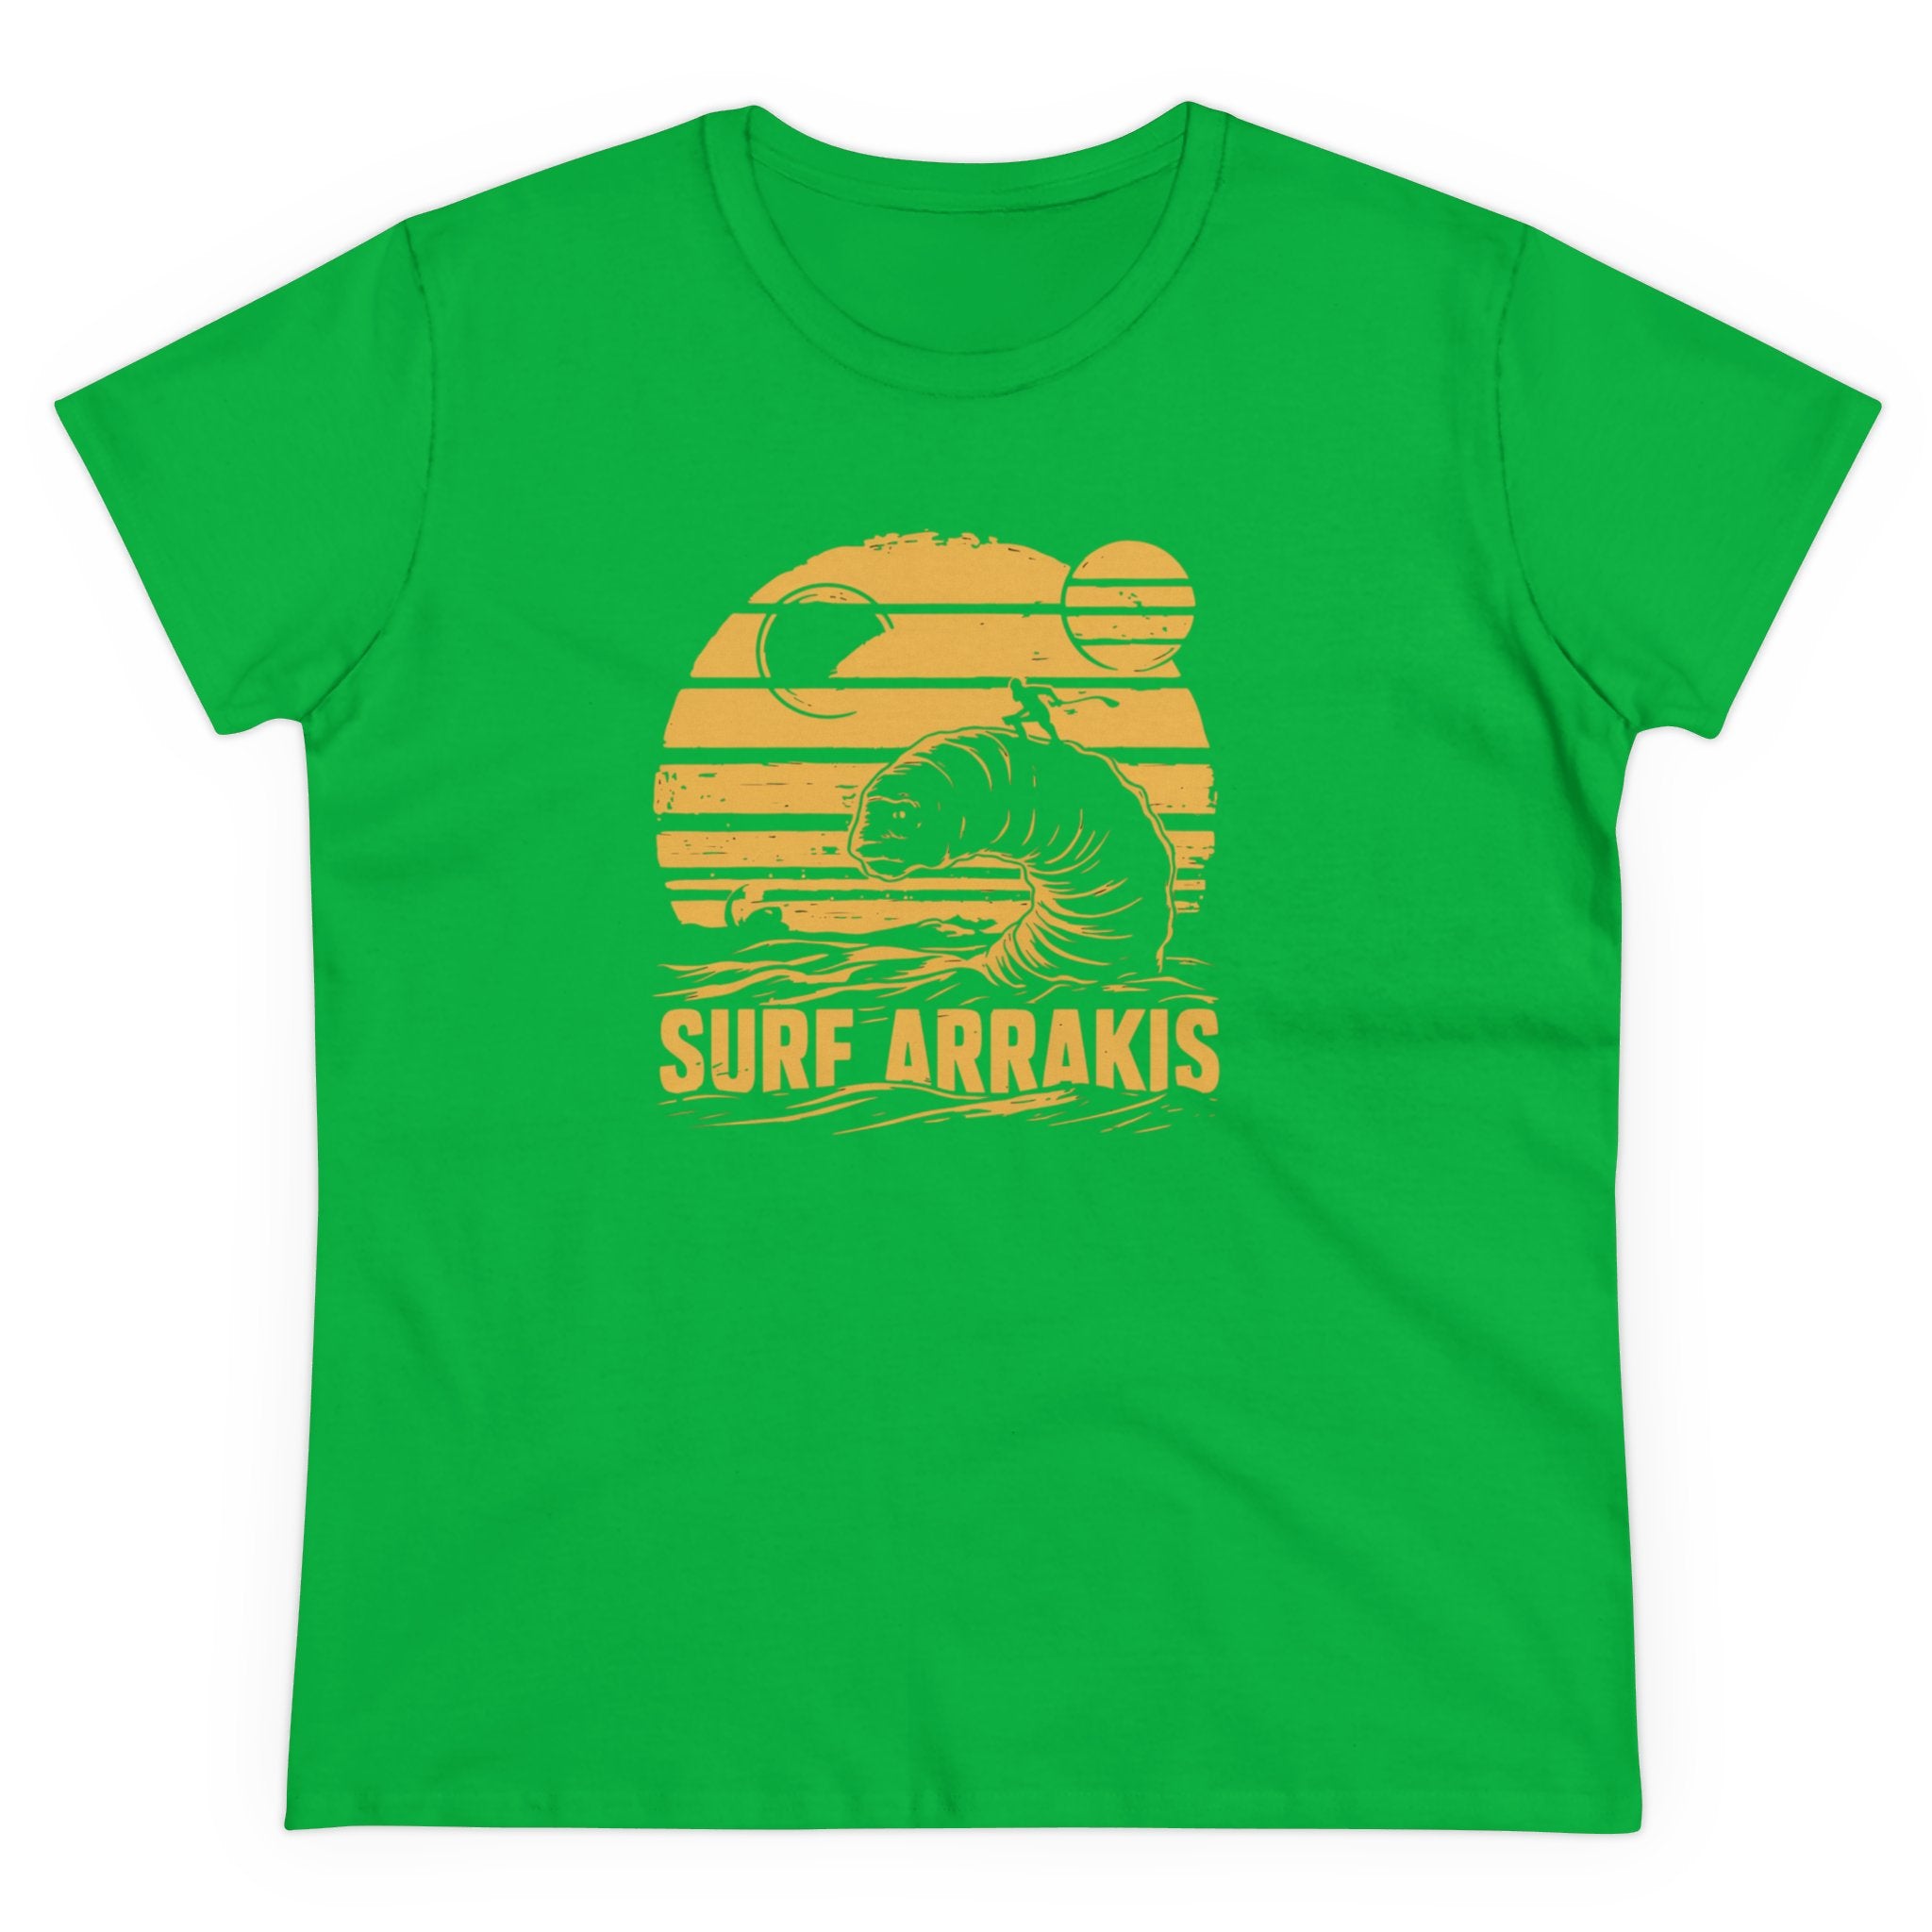 The Surf Arrakis - Women's Tee is a green t-shirt featuring a stylized sandworm and waves with the text "Surf Arrakis" against a yellow and orange sunset background with two moons. Made from soft light cotton, this pre-shrunk, comfy design ensures you stay comfortable while making a statement.